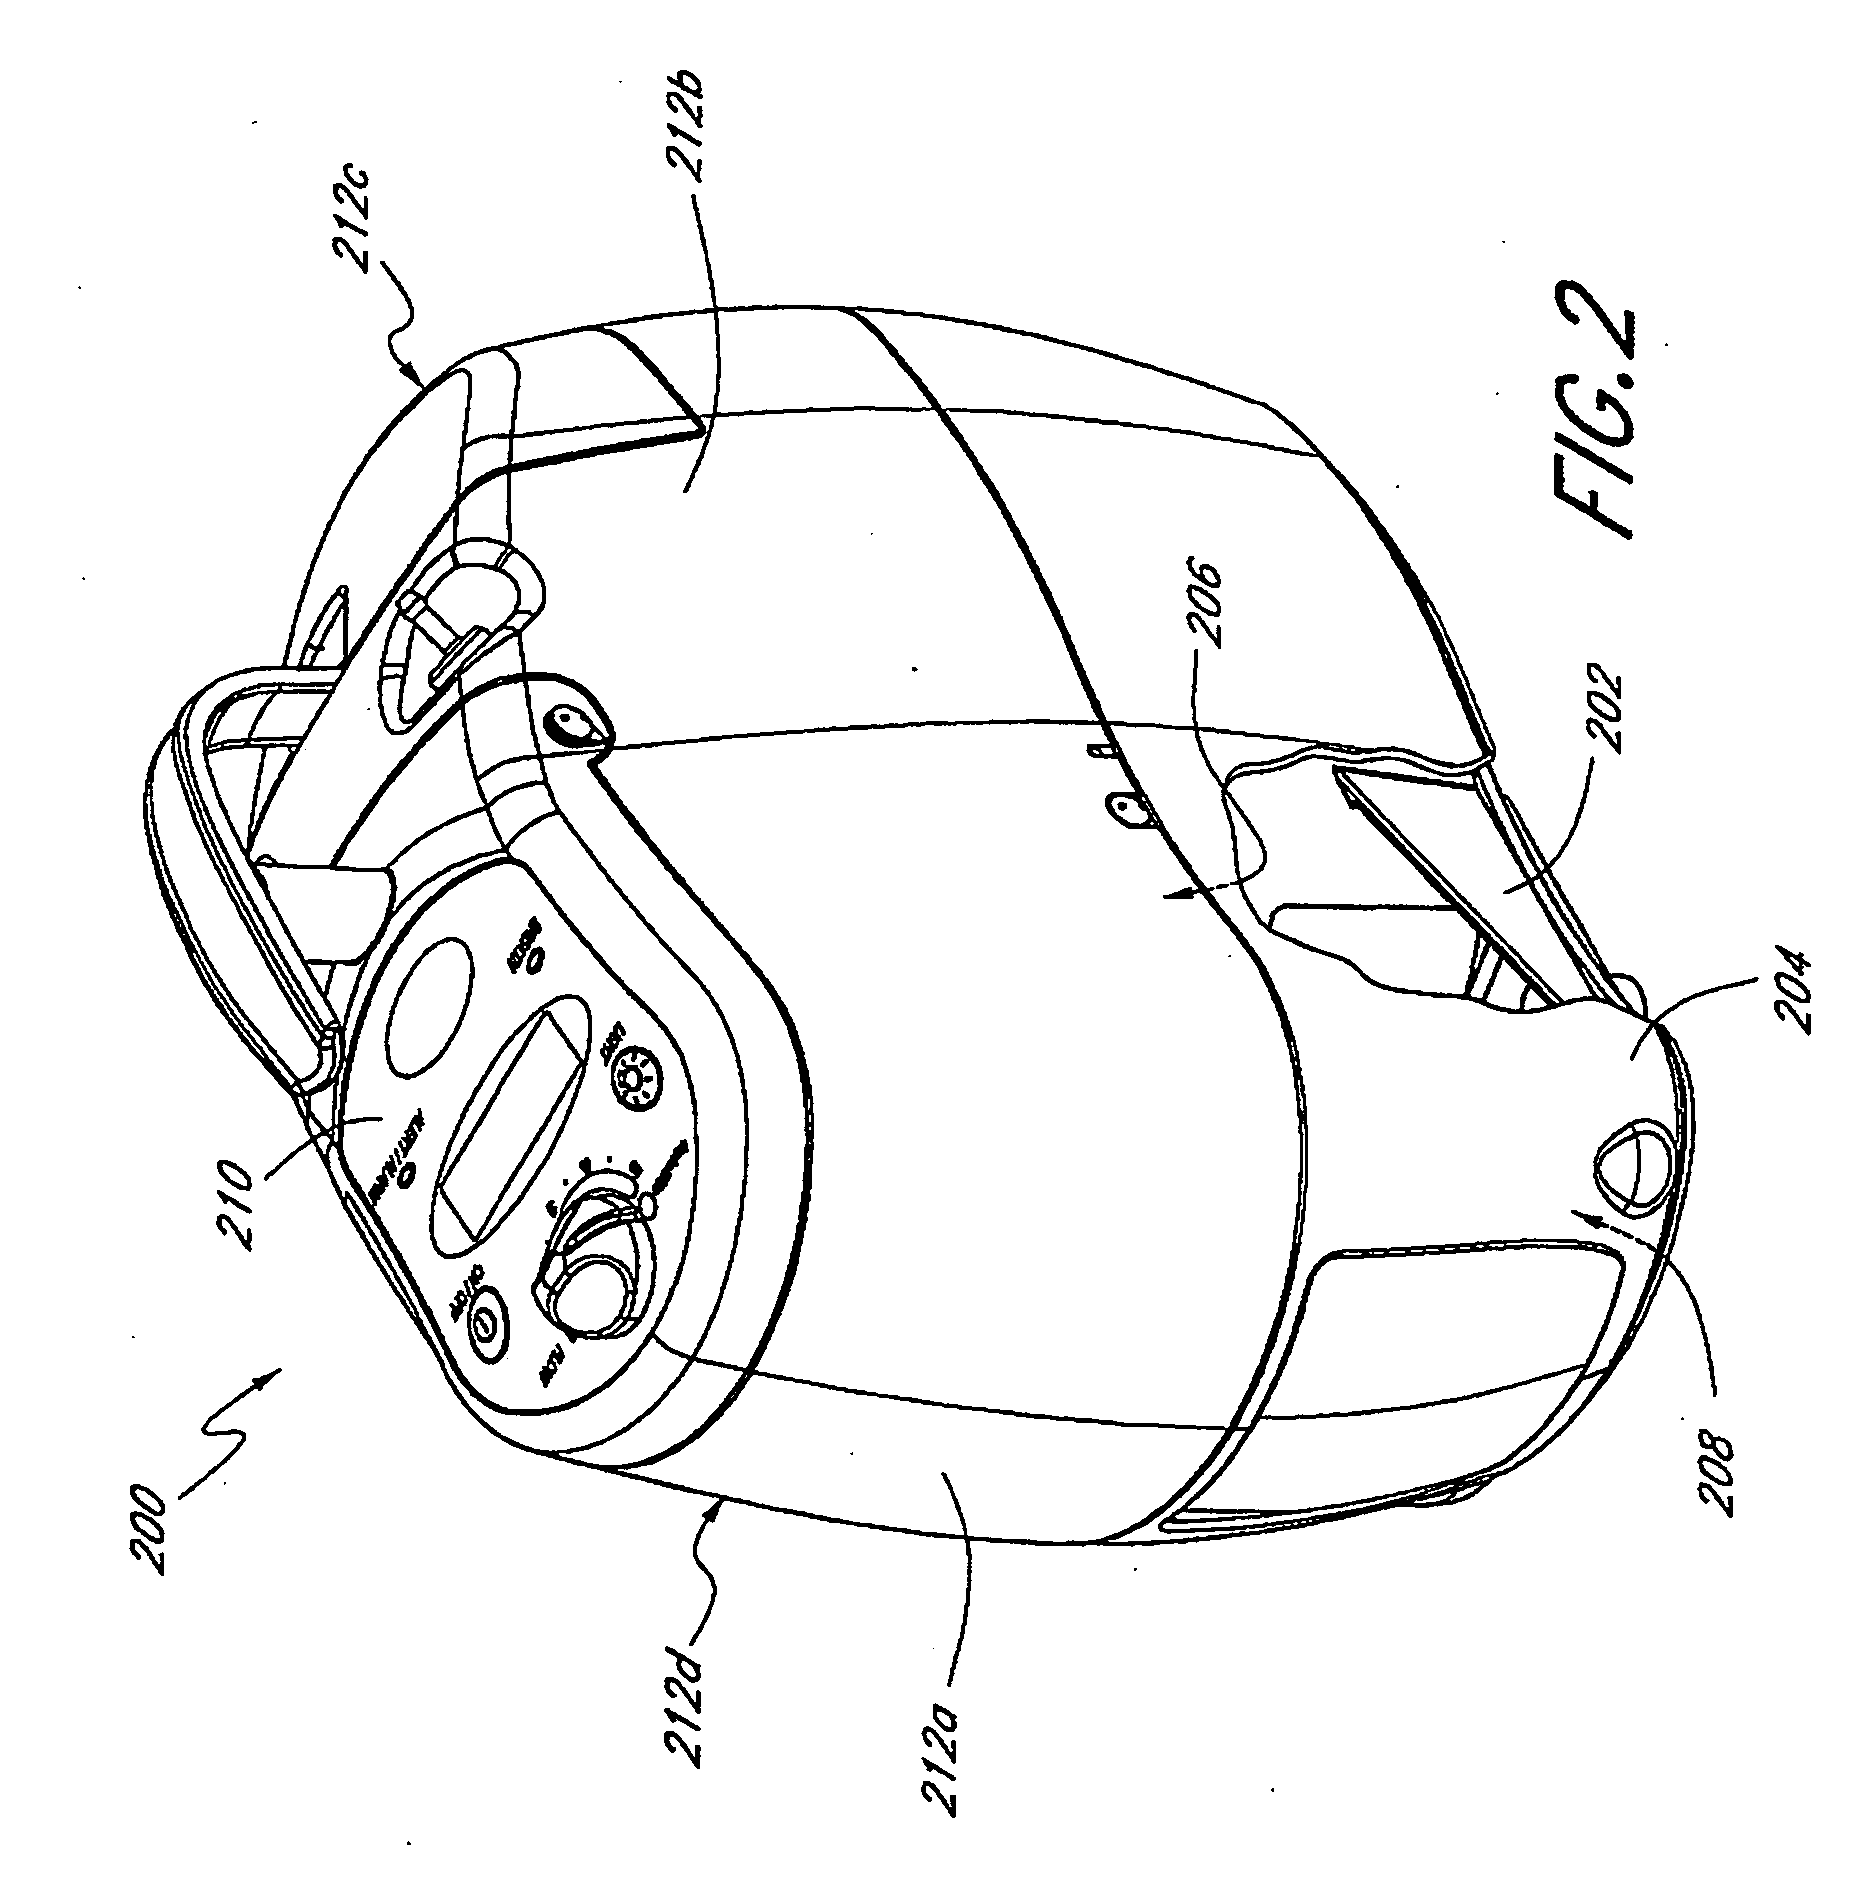 Portable gas fractionalization system